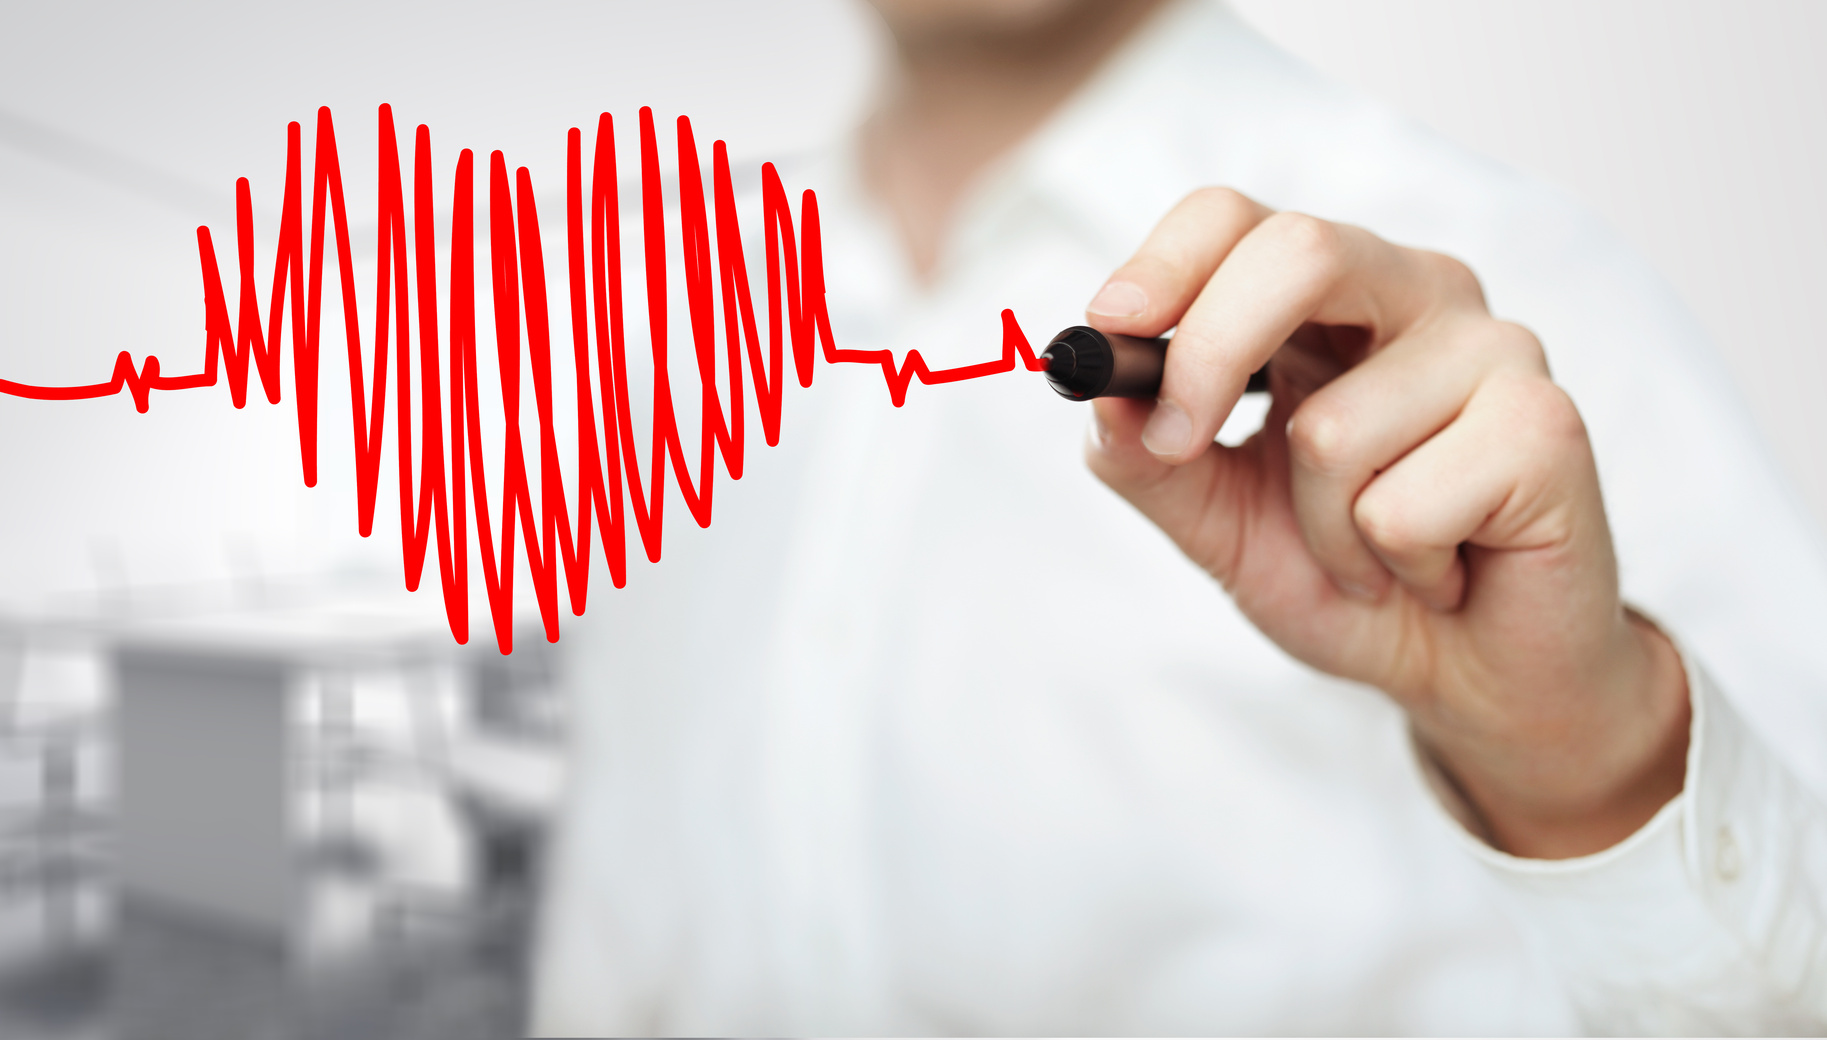 Case Study: Cardiology Co-Management Agreement